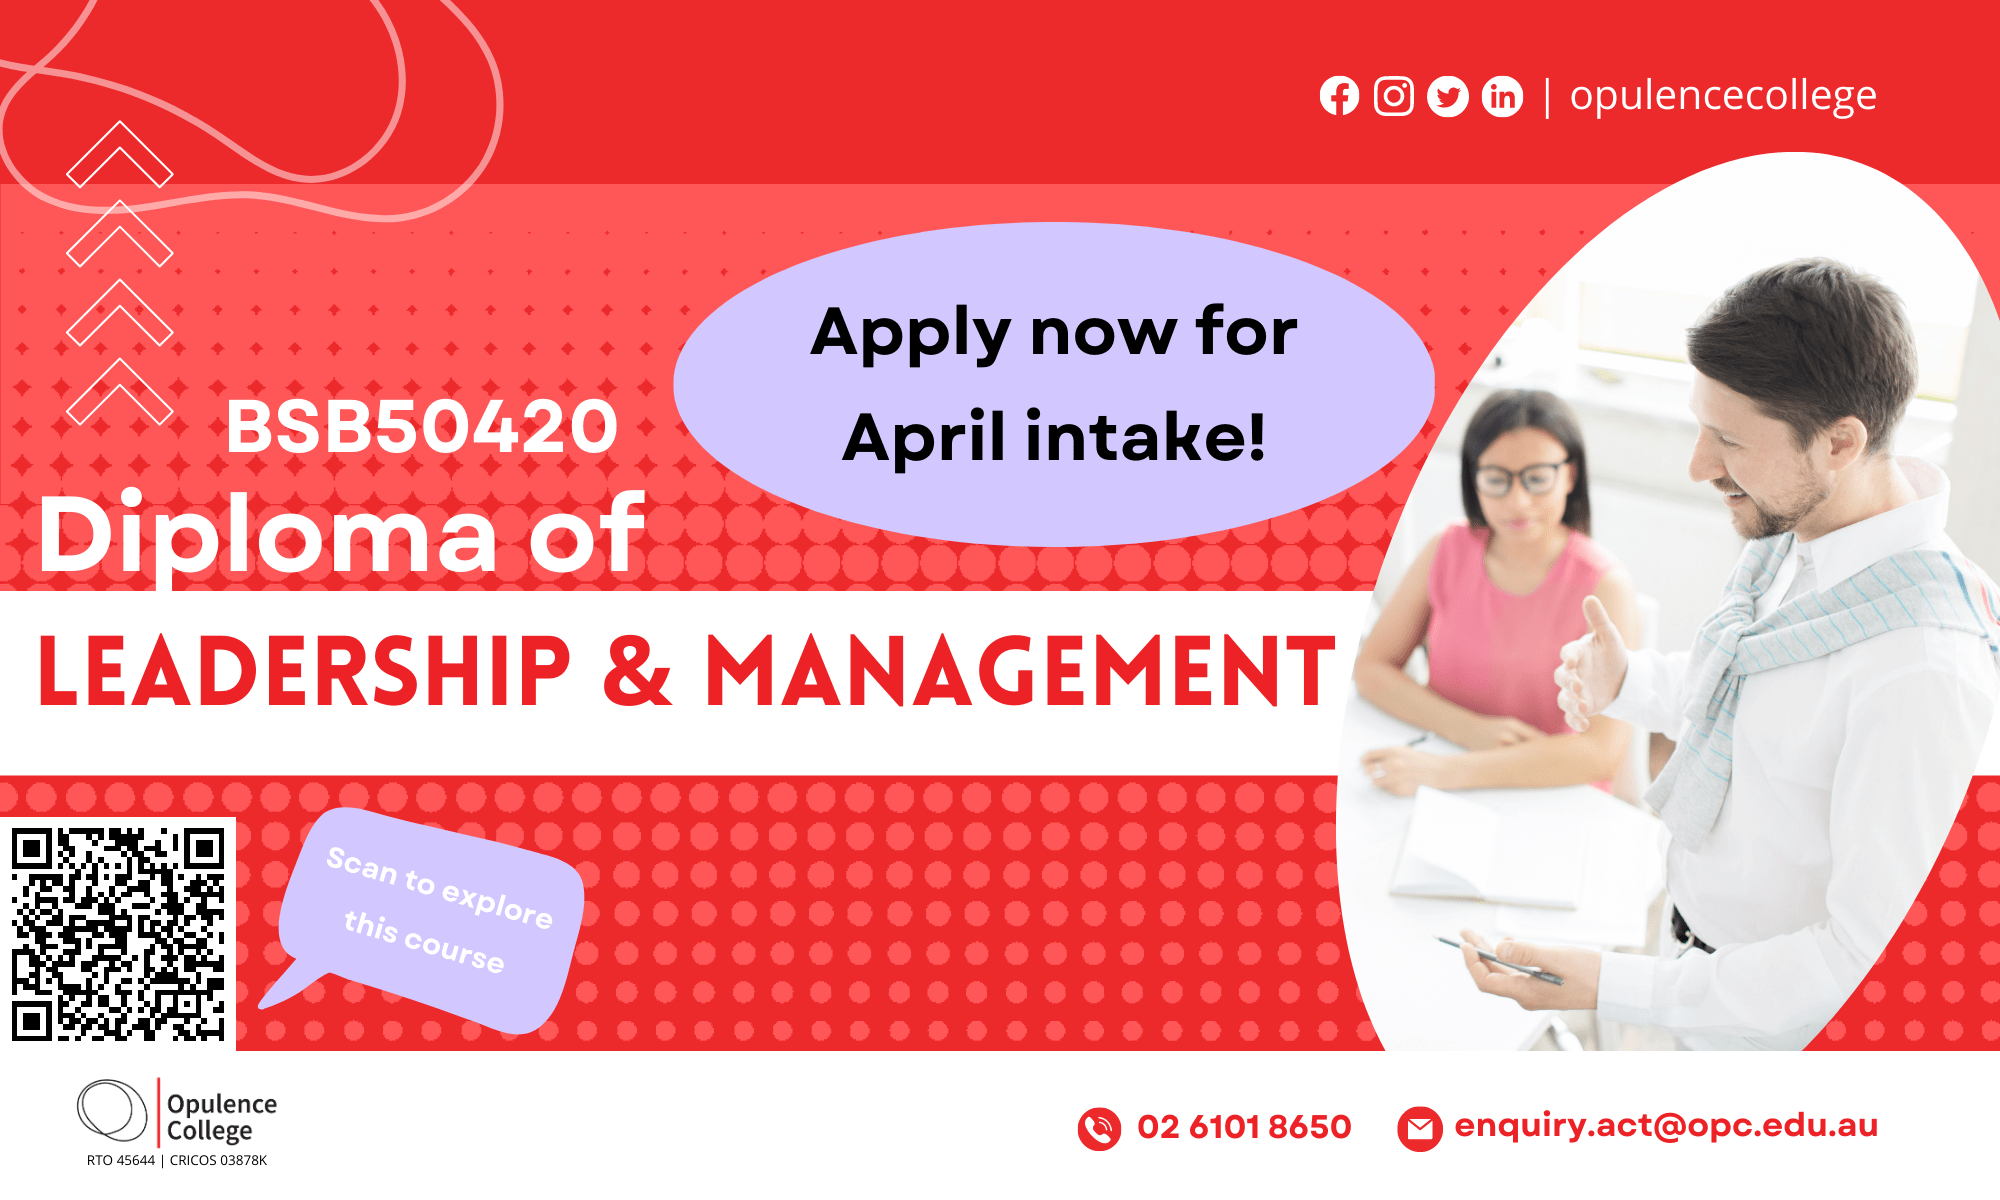 April intake now open for BSB50420 Diploma of Leadership & Management